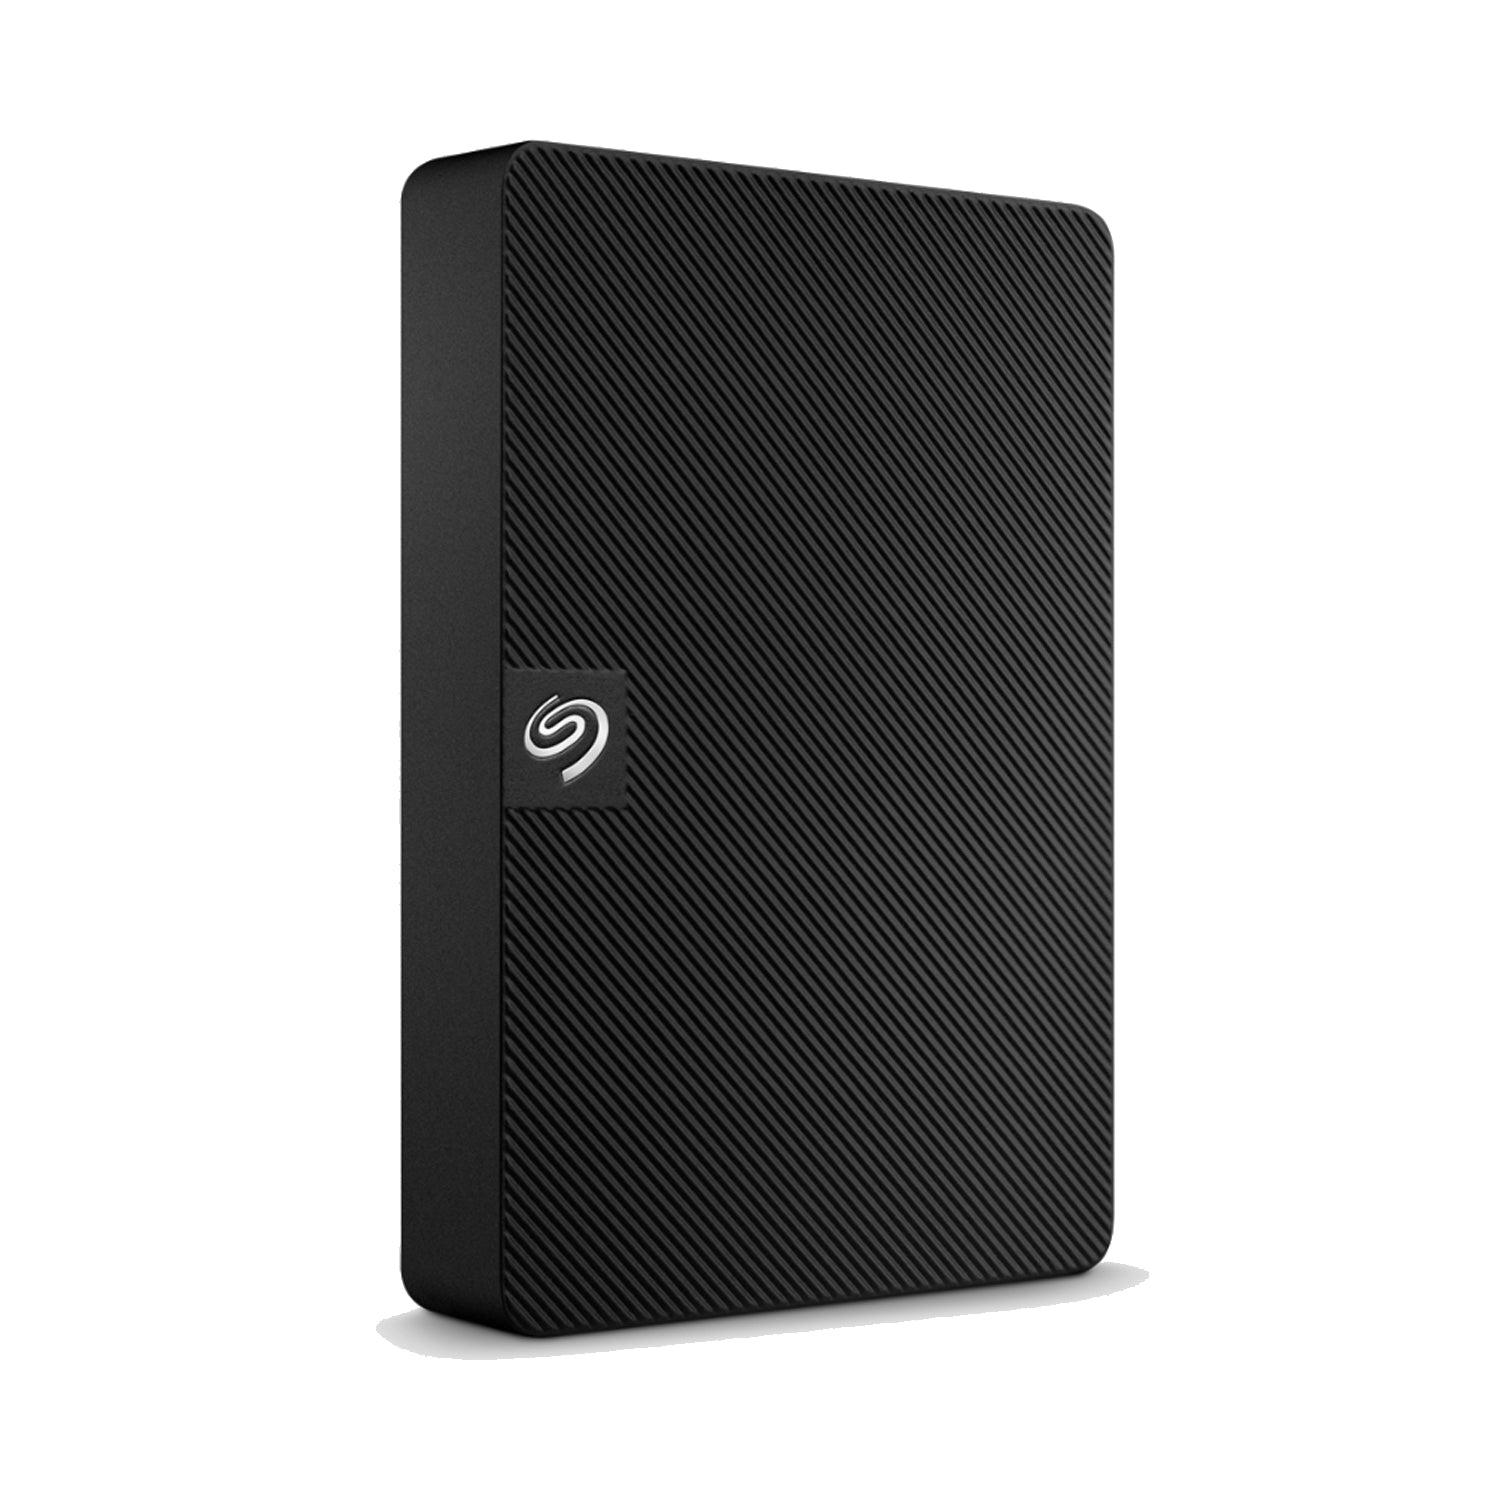 Seagate Expansion 2.5-Inch USB 3.0 Portable Hard Drive